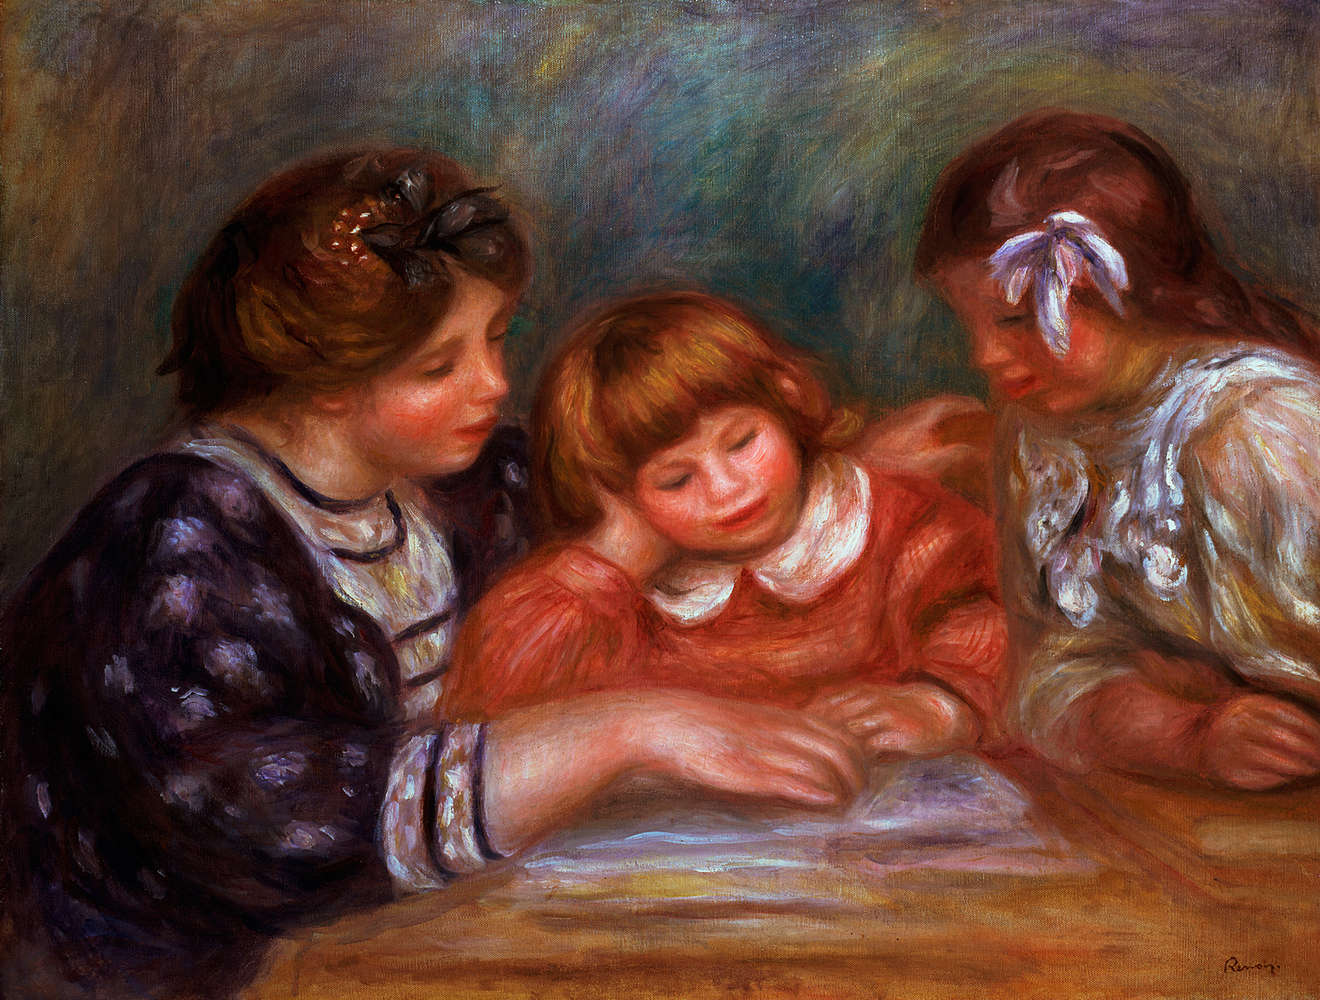             The Lesson" mural by Pierre Auguste Renoir
        